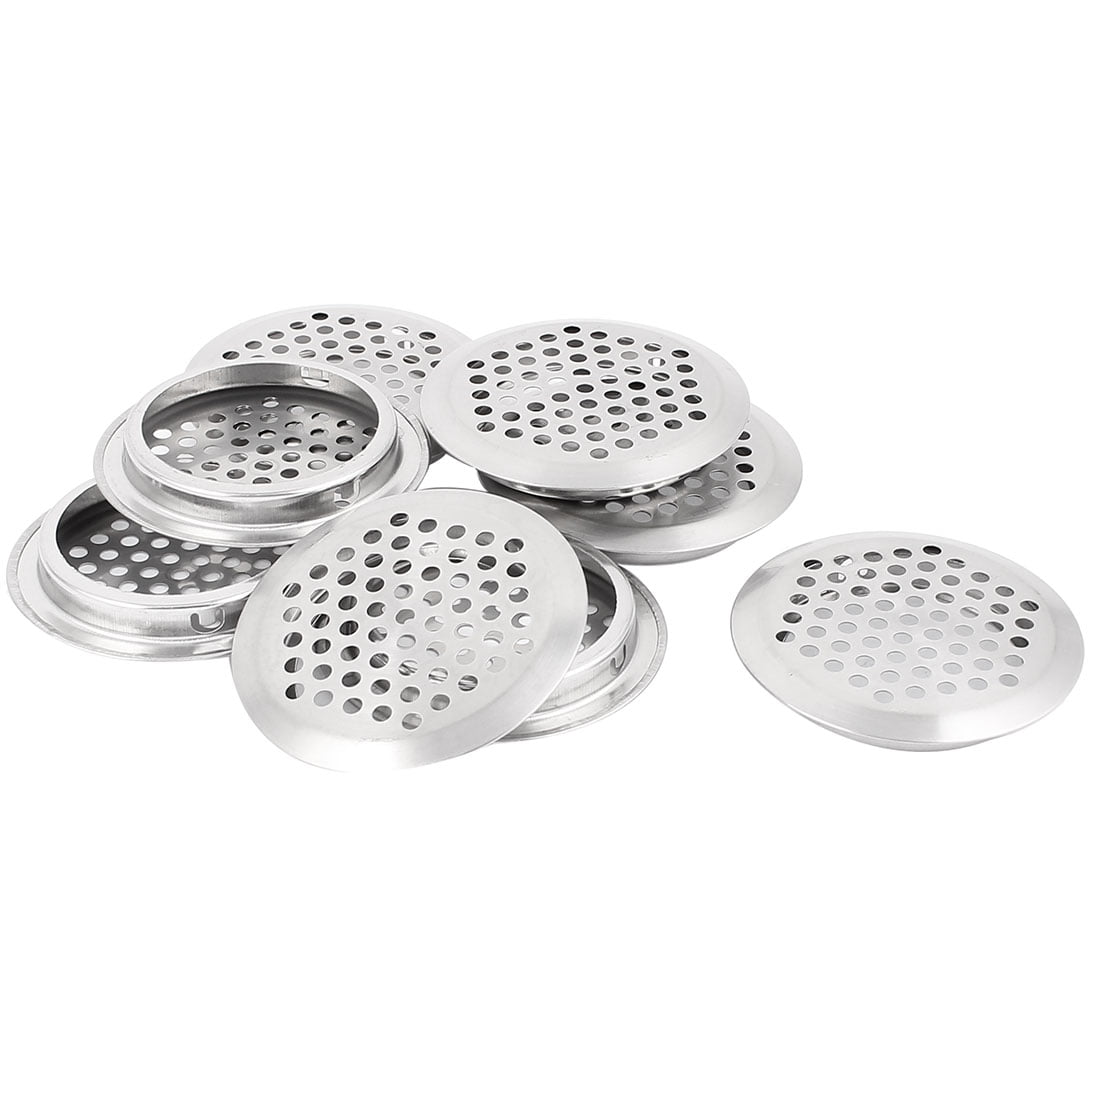 53mm Bottom Dia Mesh Panel Shoes Cupboard Cabinet Air Vent Louver Cover 5pcs 